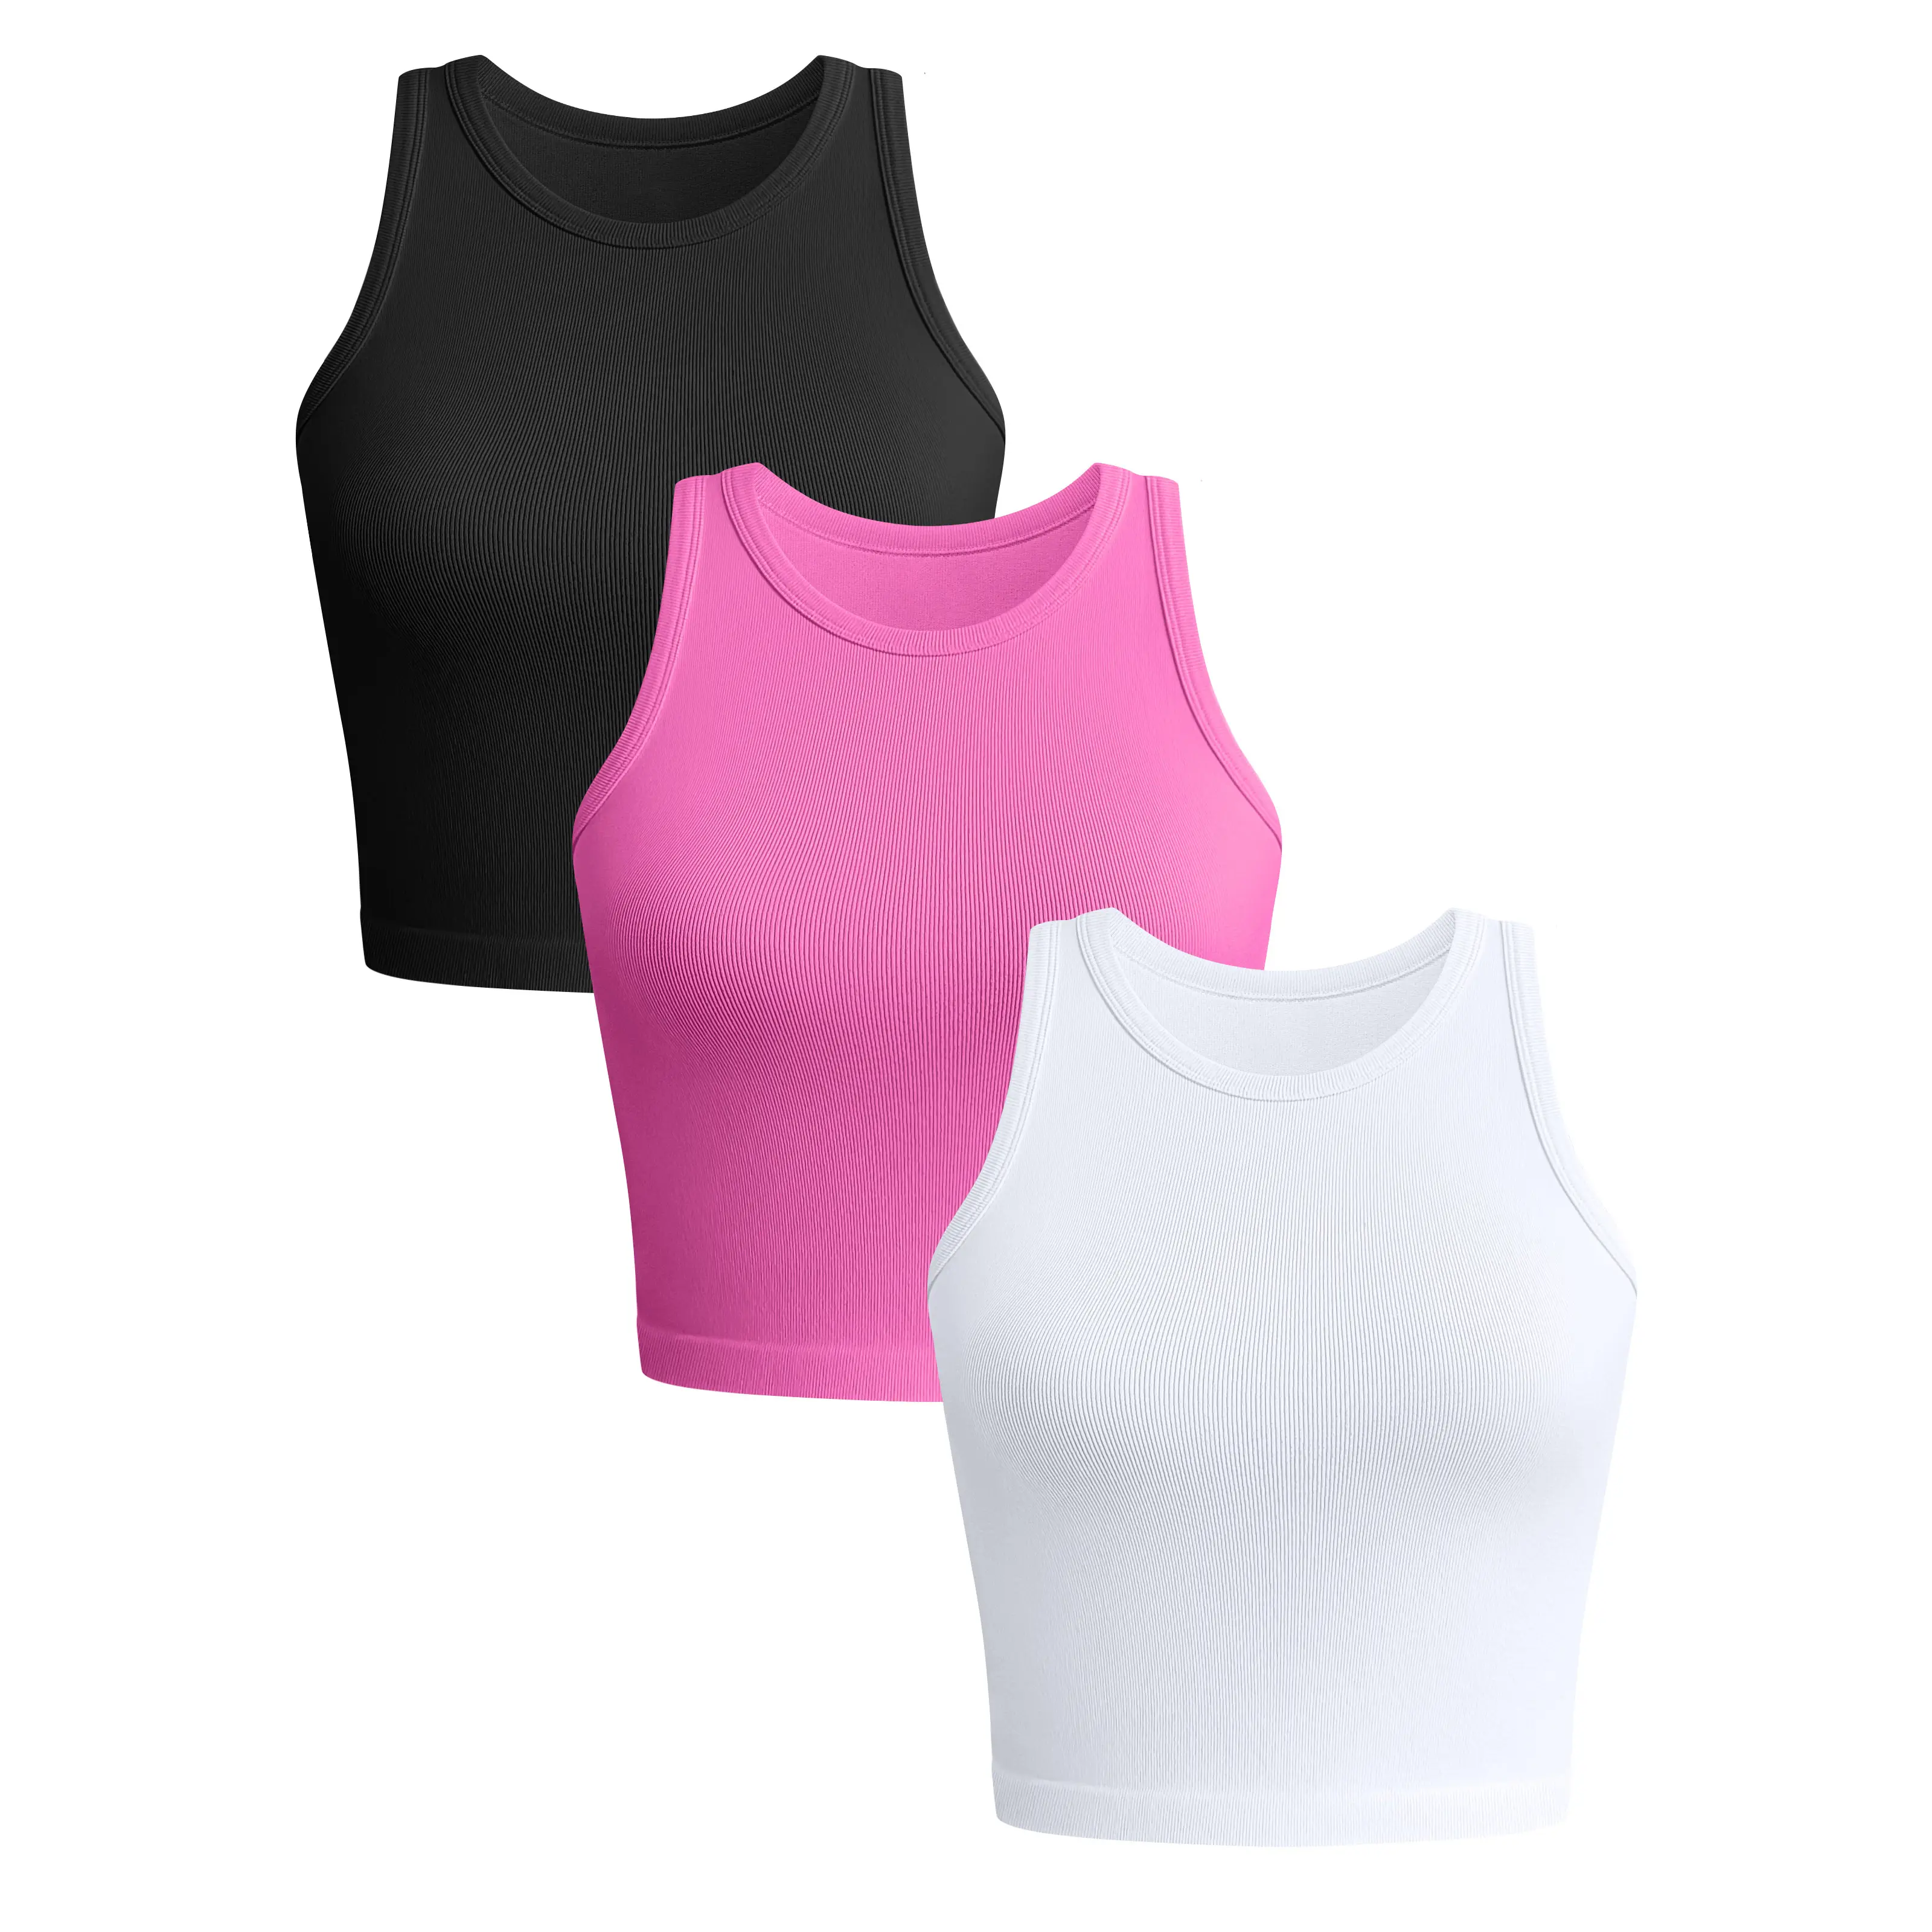 New Women's Round Neck Top Knitted Seamless Rib Fitness Top Tight Sleeveless Sports Clothes Yoga Top Short